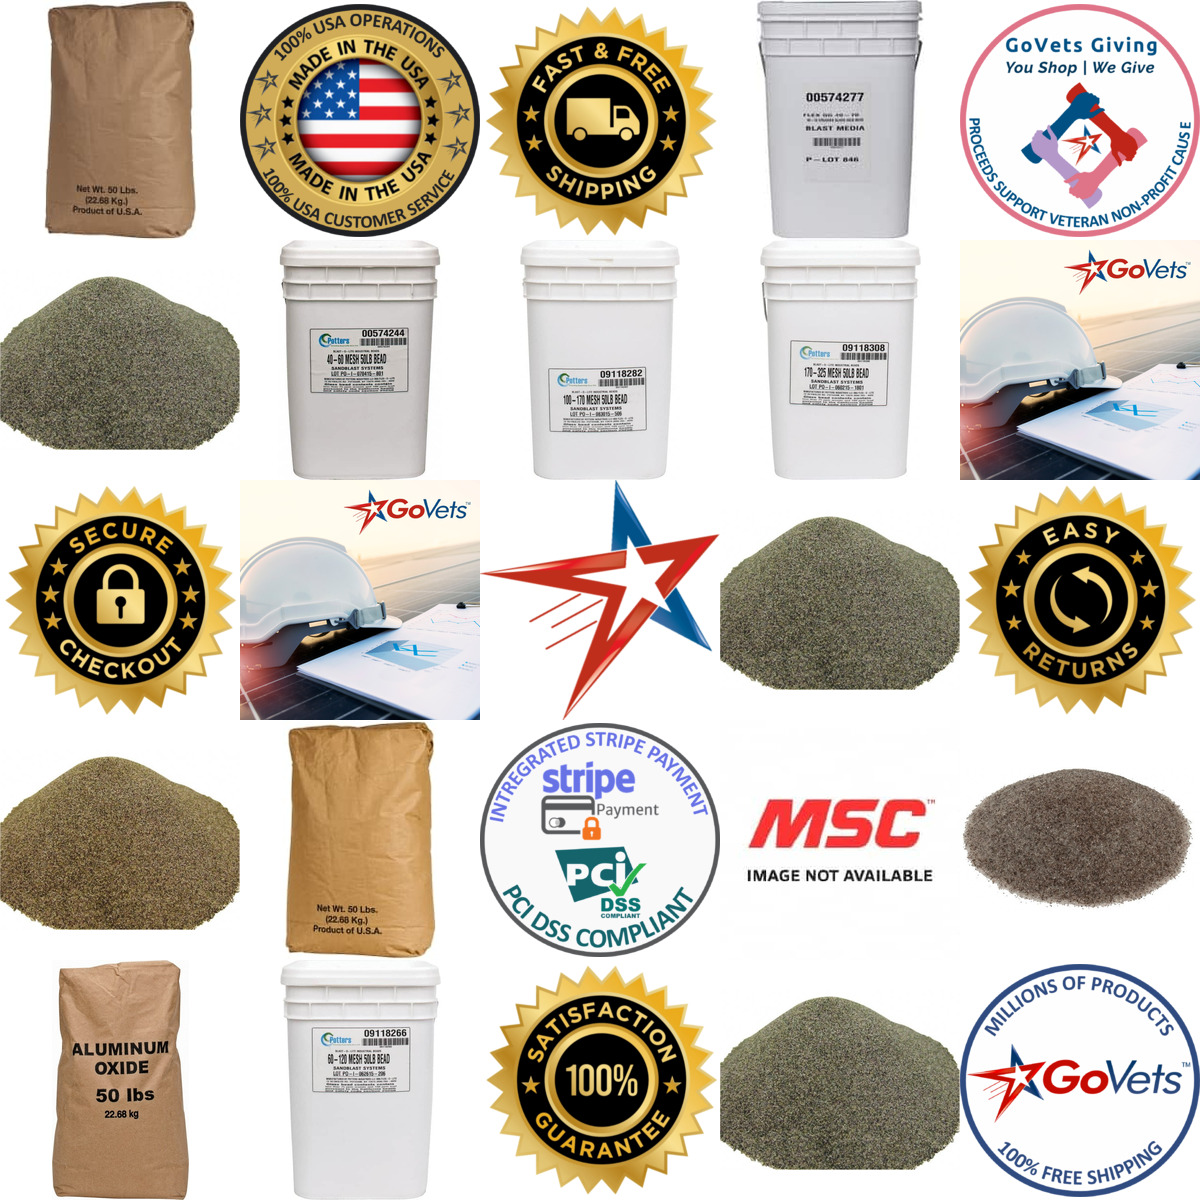 A selection of Msc products on GoVets